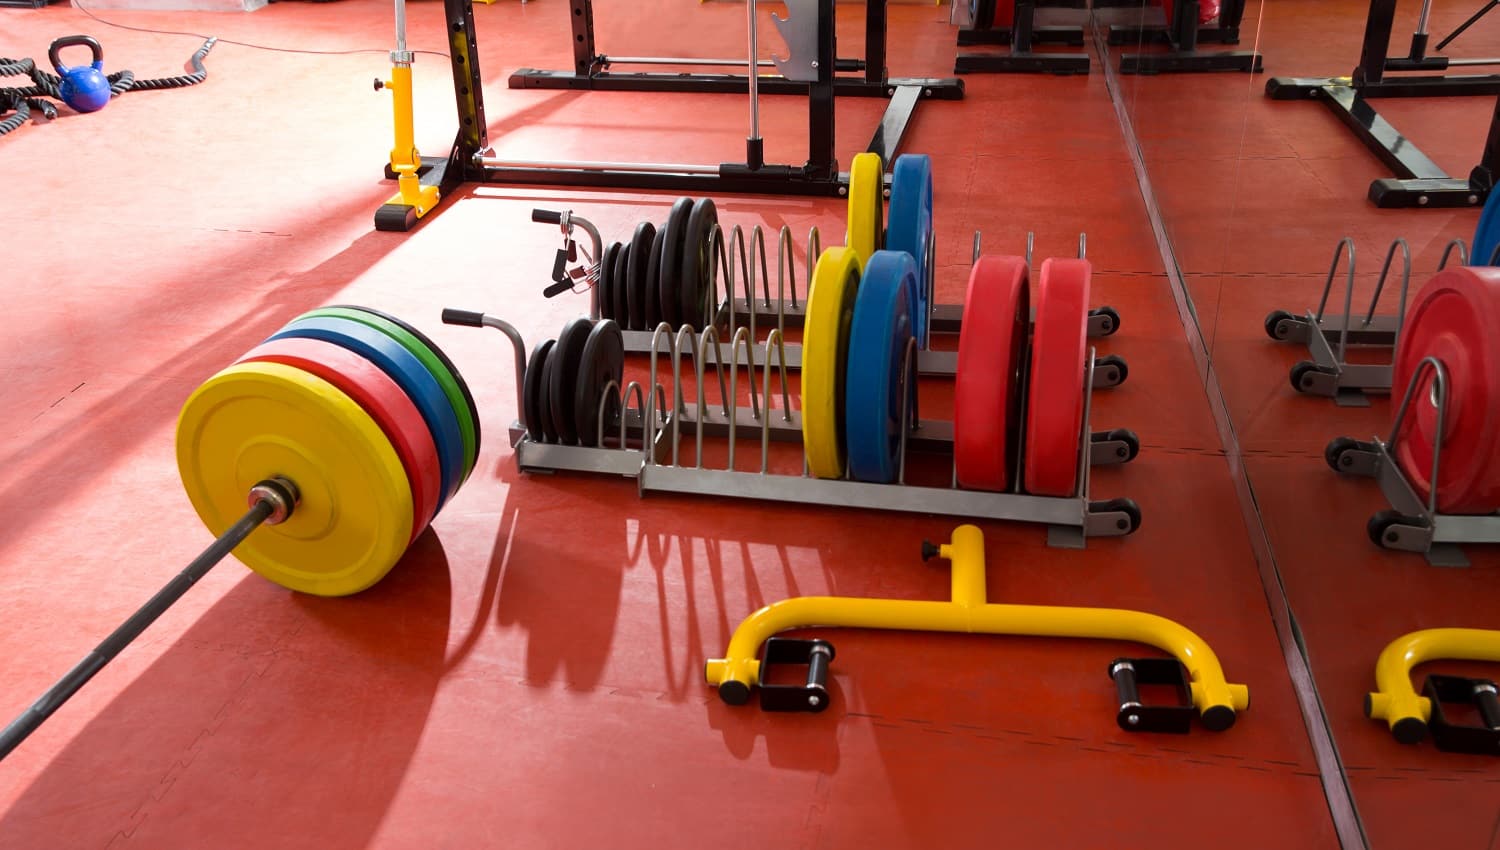 Crossfit fitness gym weight lifting bar colorful equipment on red floor